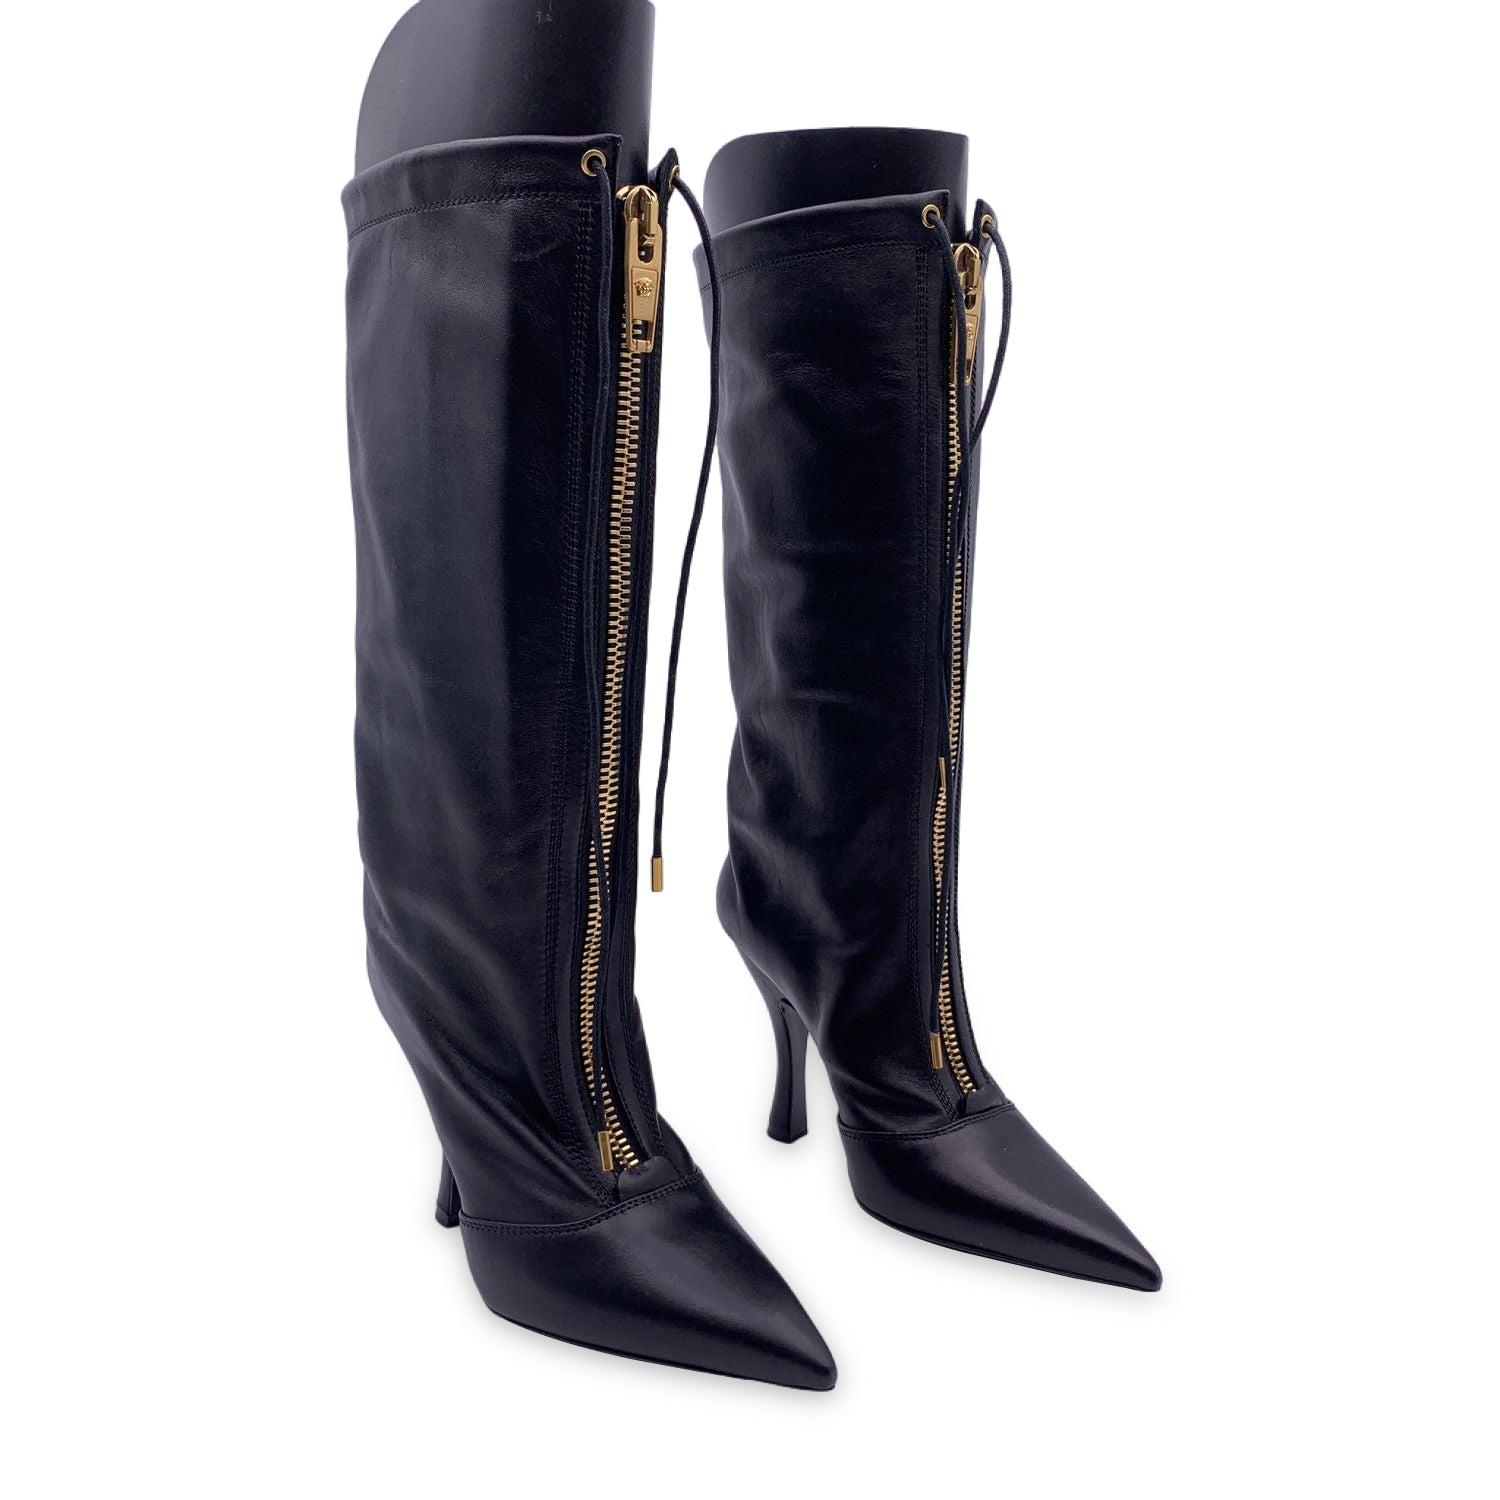 Versace Black Leather Heeled Boots with Central Zip Size 36 In Excellent Condition For Sale In Rome, Rome